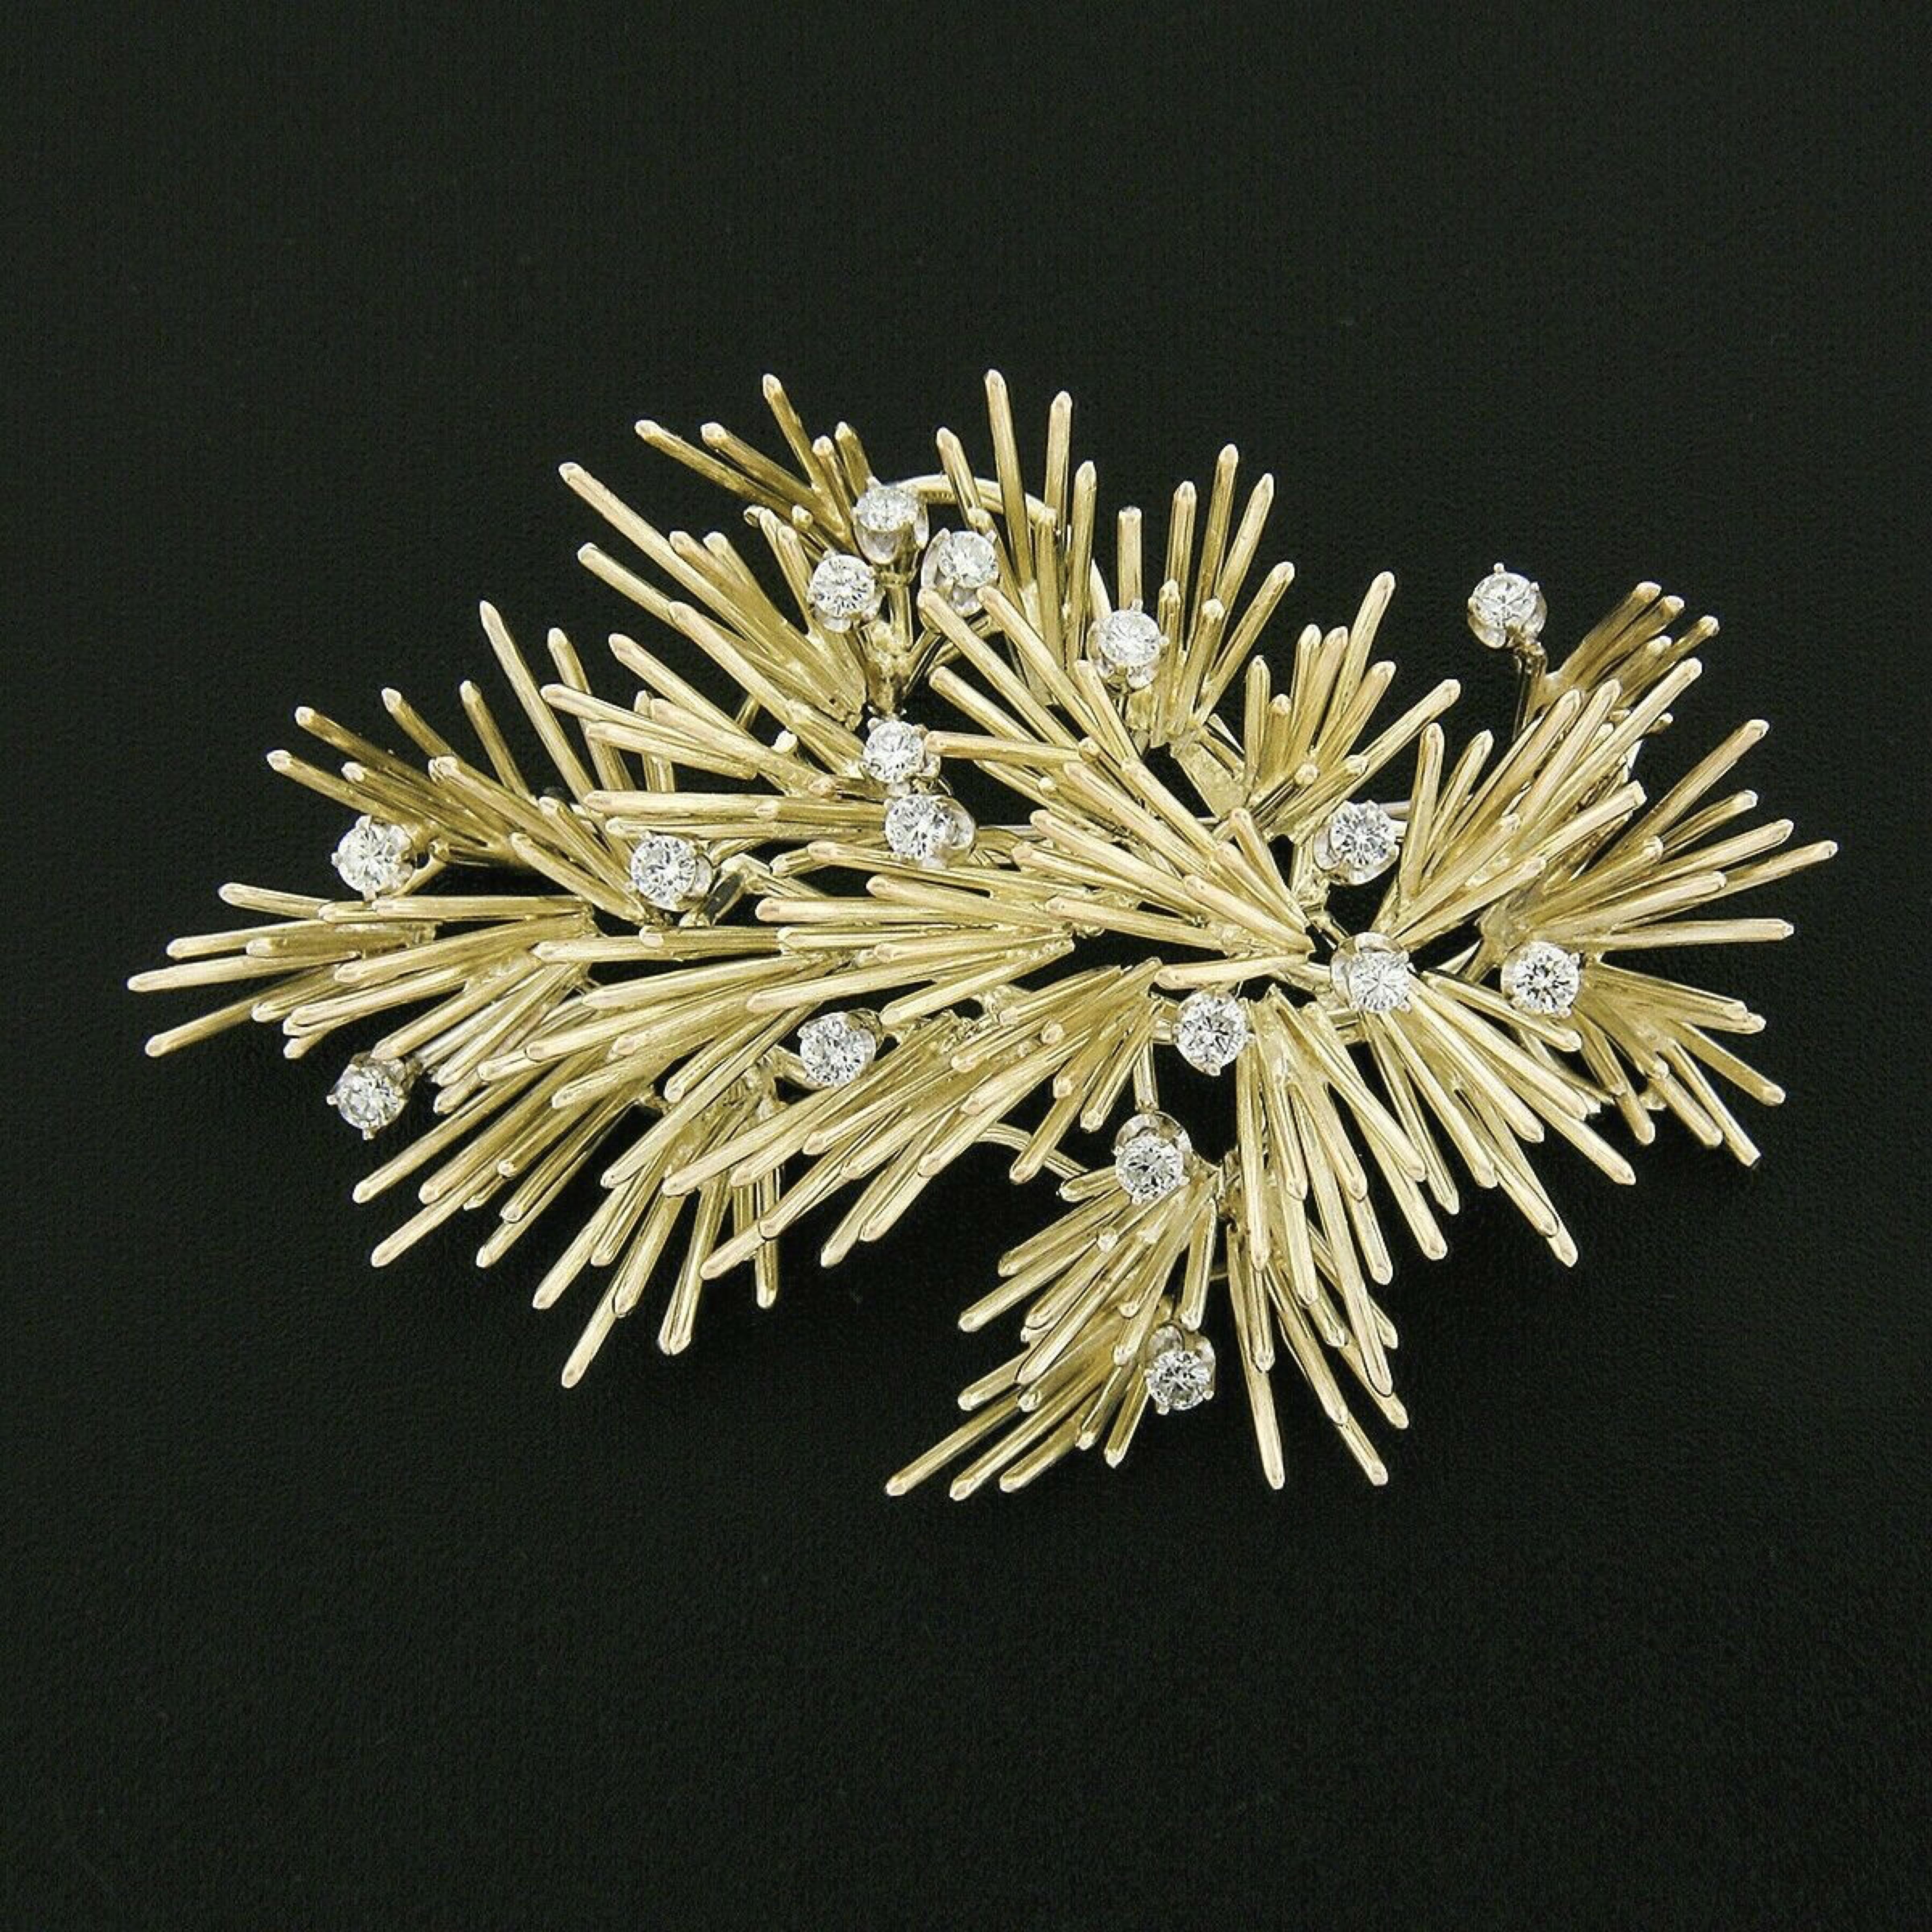 This outstanding vintage brooch/pin is well crafted in solid 14k greenish yellow gold and features a large handmade wire spray design set with fine quality diamonds throughout. These stunning round brilliant cut diamonds are perfectly prong set,